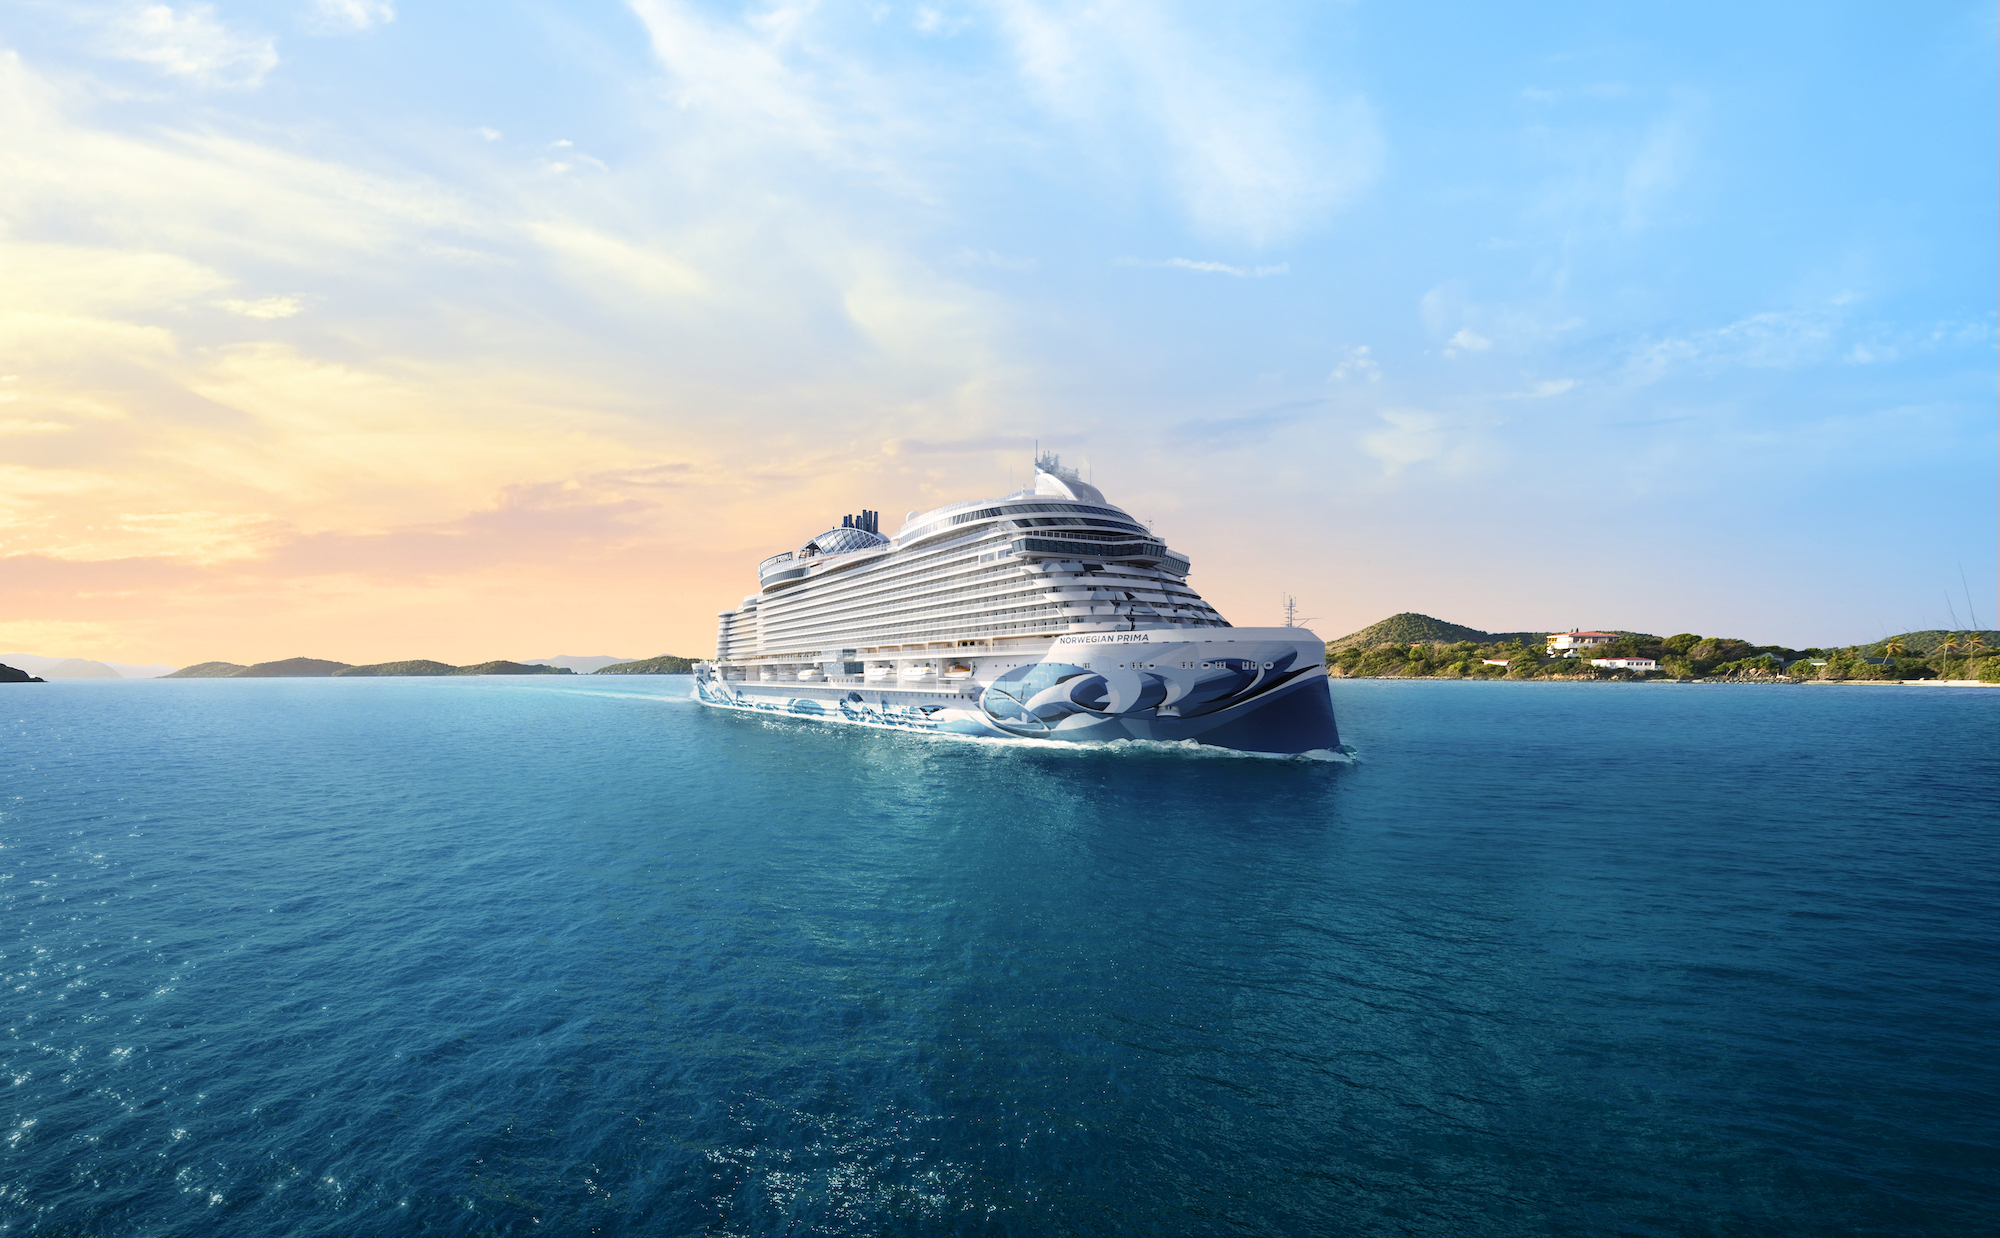 Norwegian Cruise Line introduces first ship as part of new Prima Class